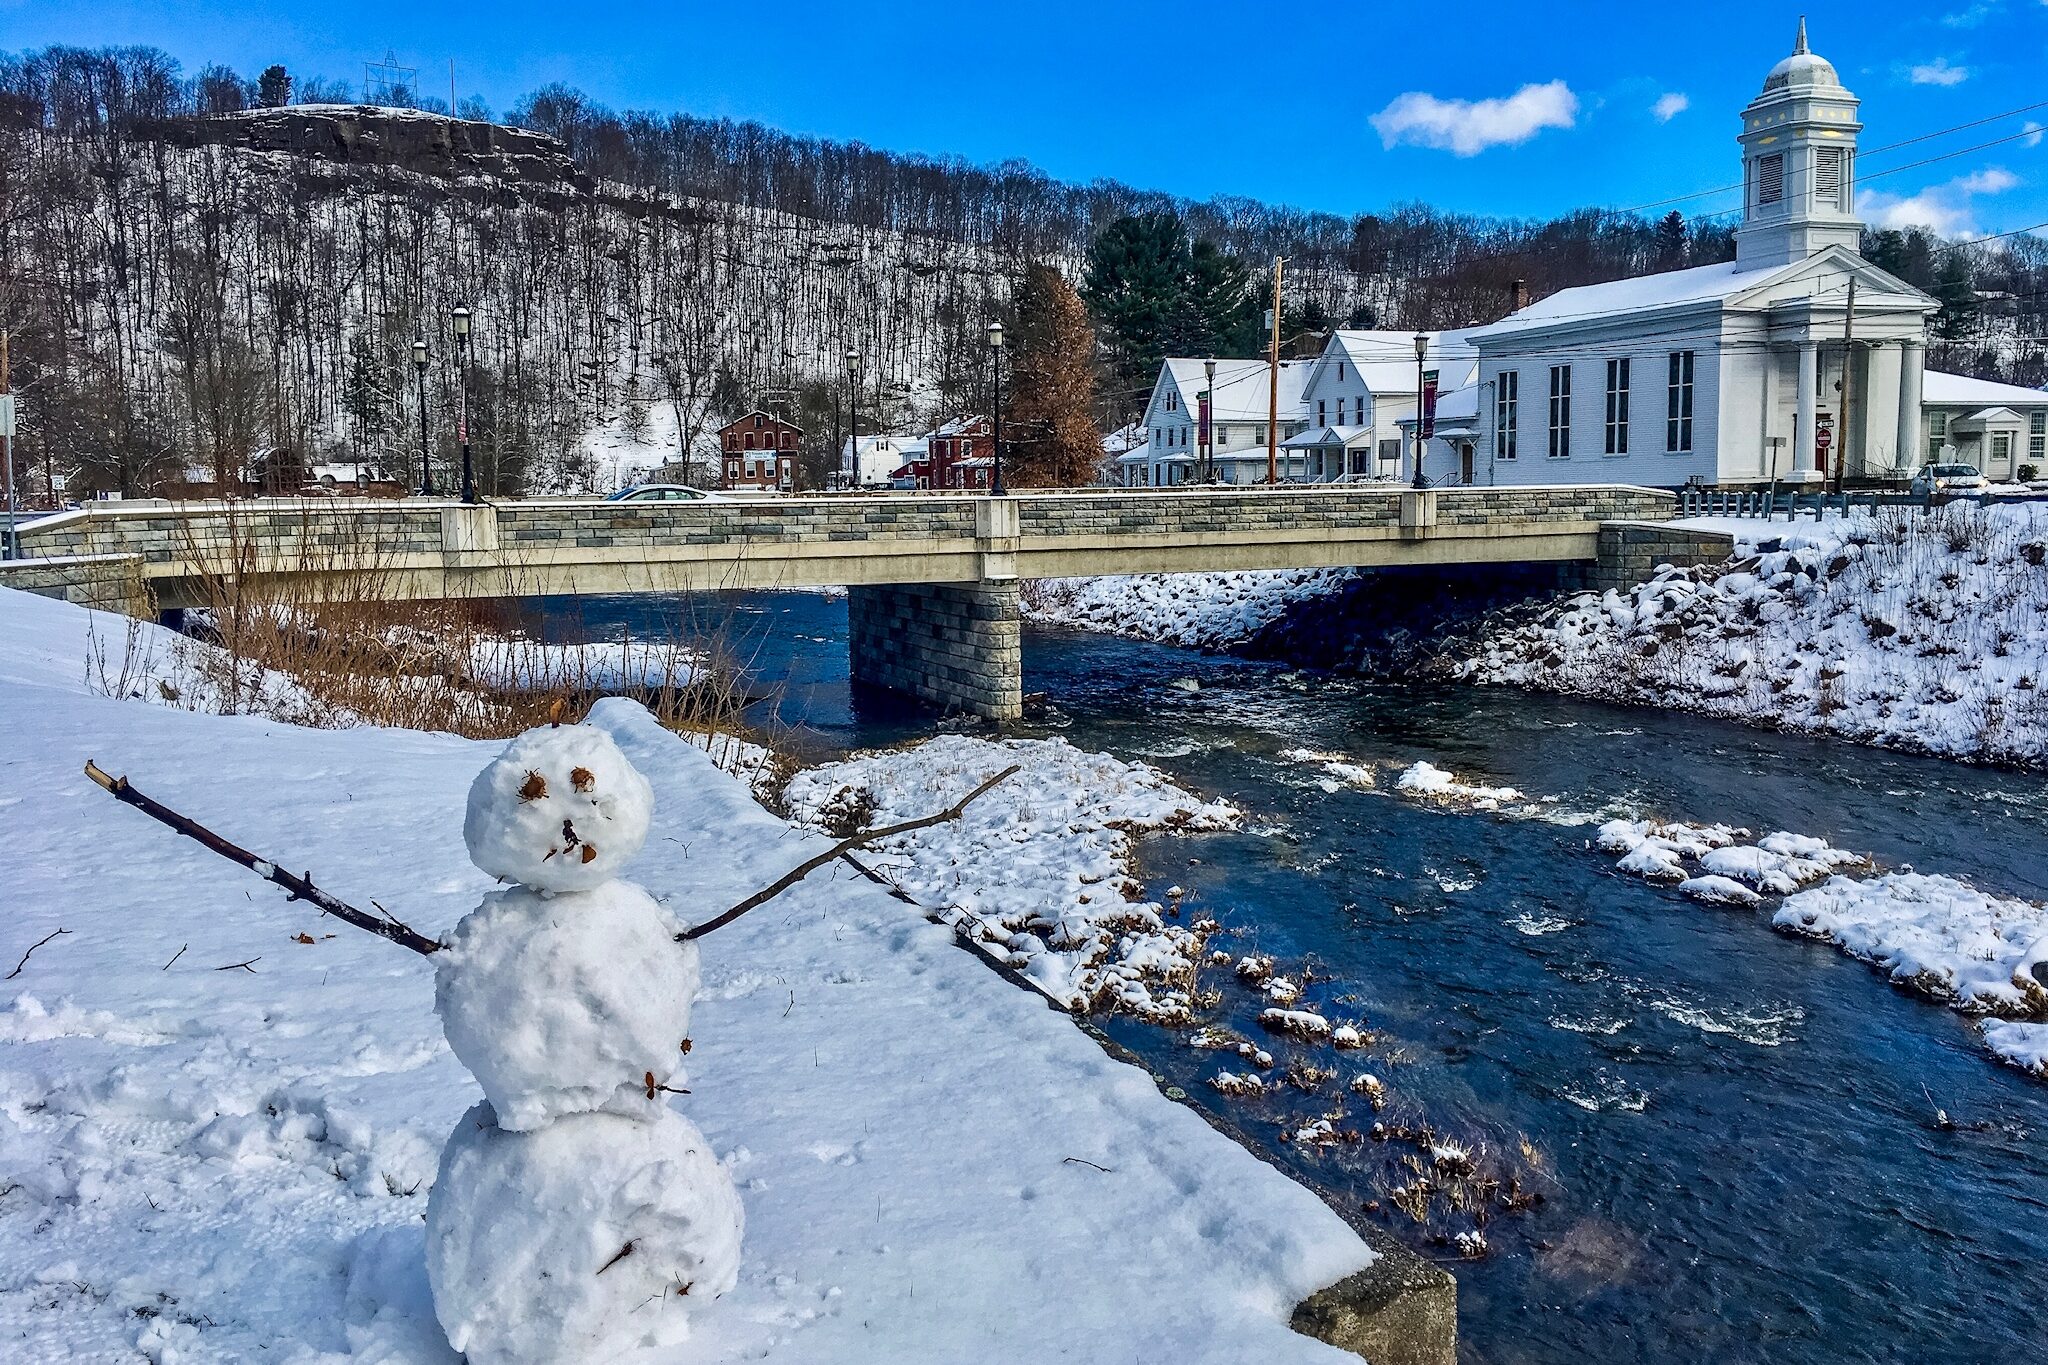 The Lachawaxen River with a bridge and a church in the background, and a snowman in the foreground